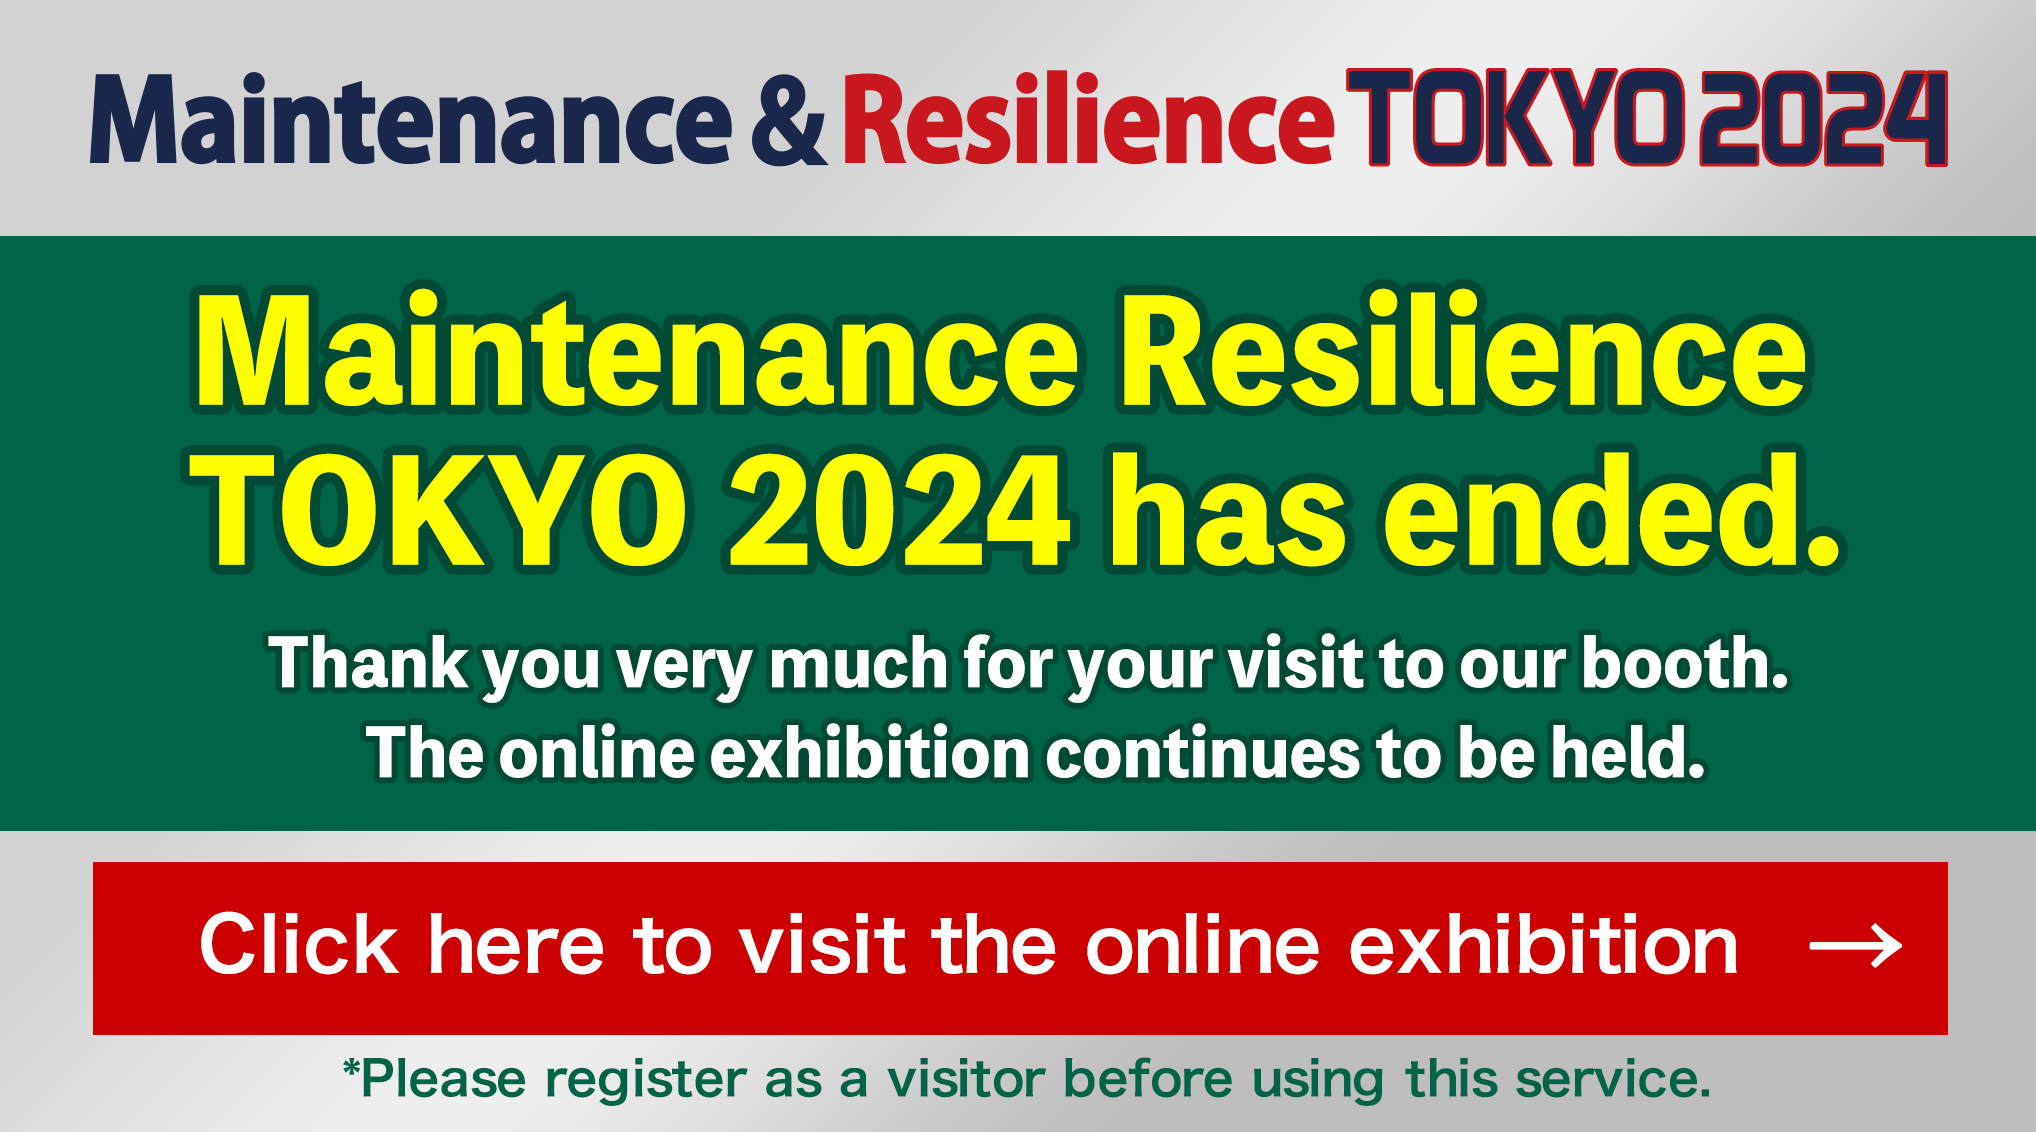 Maintenance Resilience TOKYO 2024 has ended.Thank you very much for your visit to our booth. The online exhibition continues to be held.